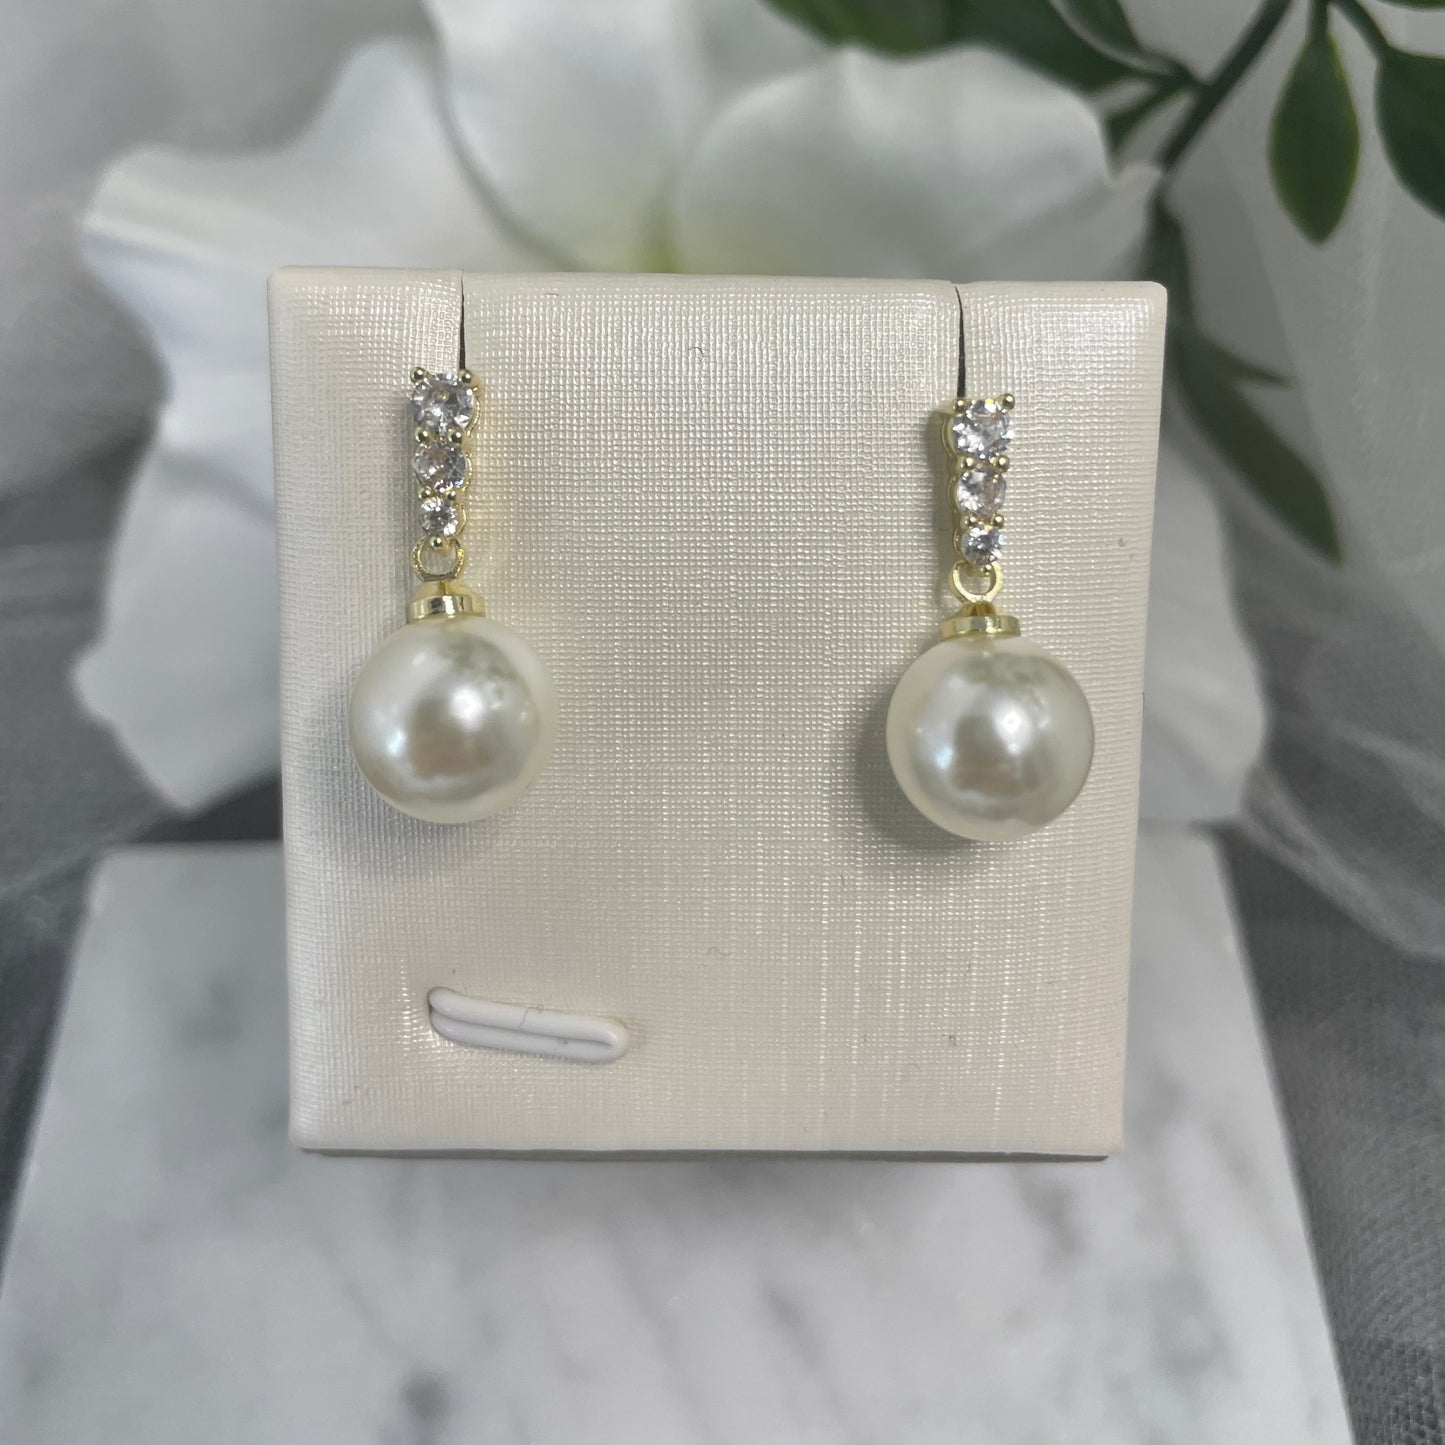 Lena Gold-Plated Wedding Earrings with Cushion-Cut Zircon and Pearl Stud - Divine Bridal